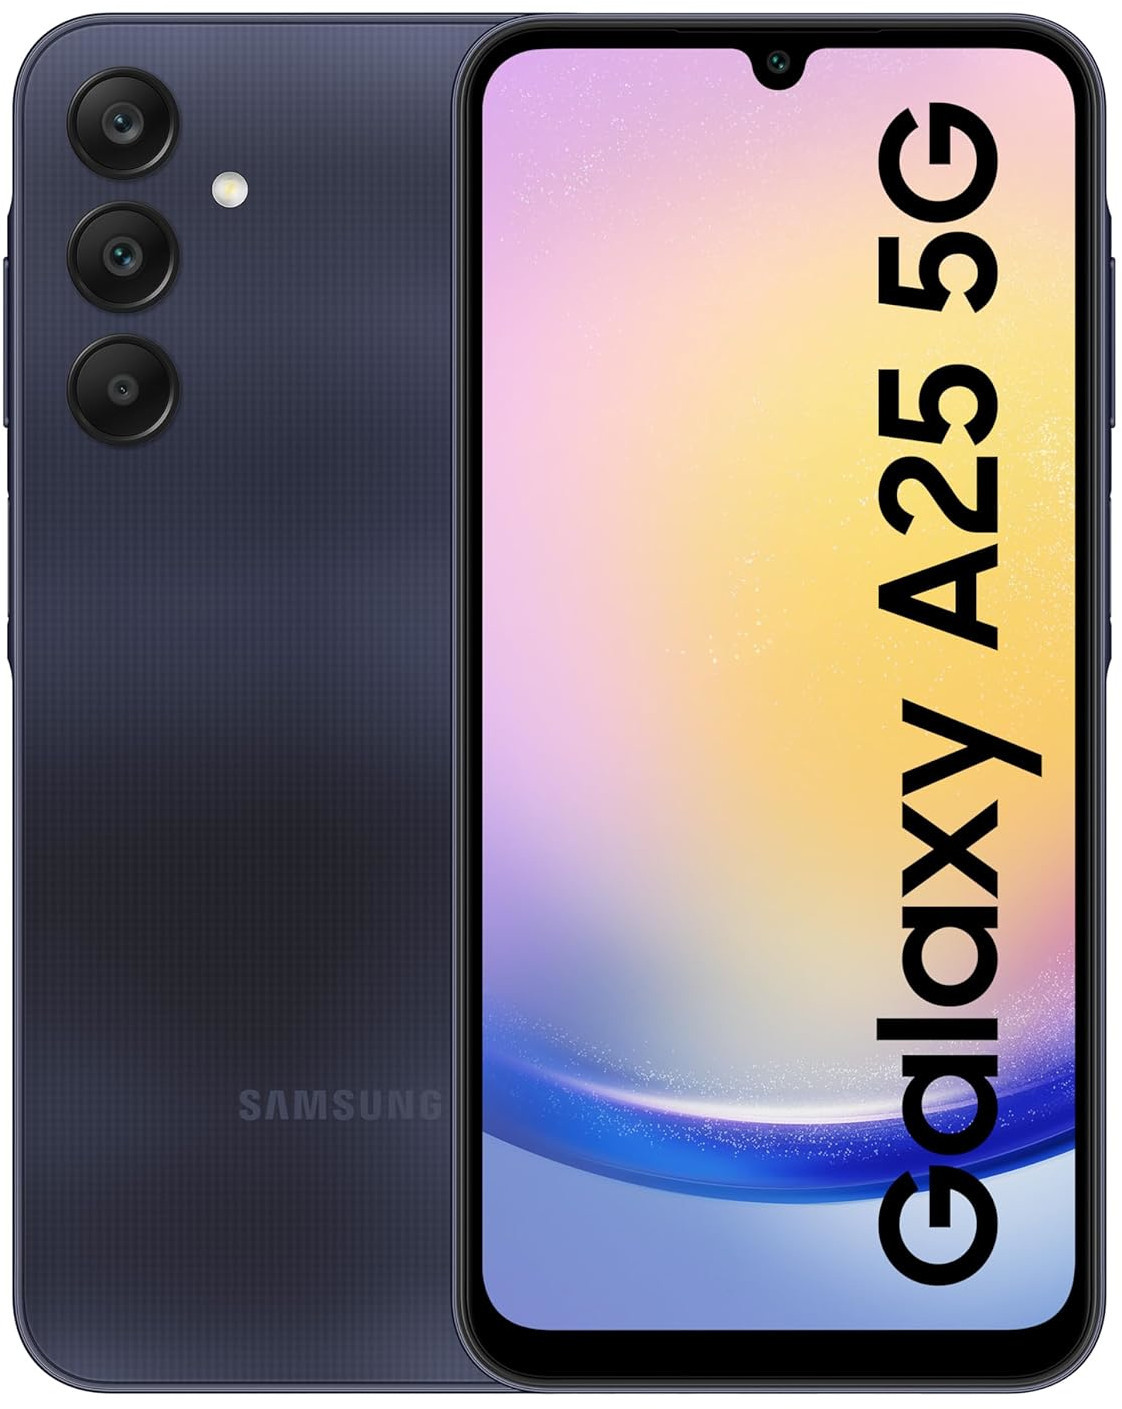 Samsung Galaxy A23 5G Specifications Tipped via Geekbench Listing